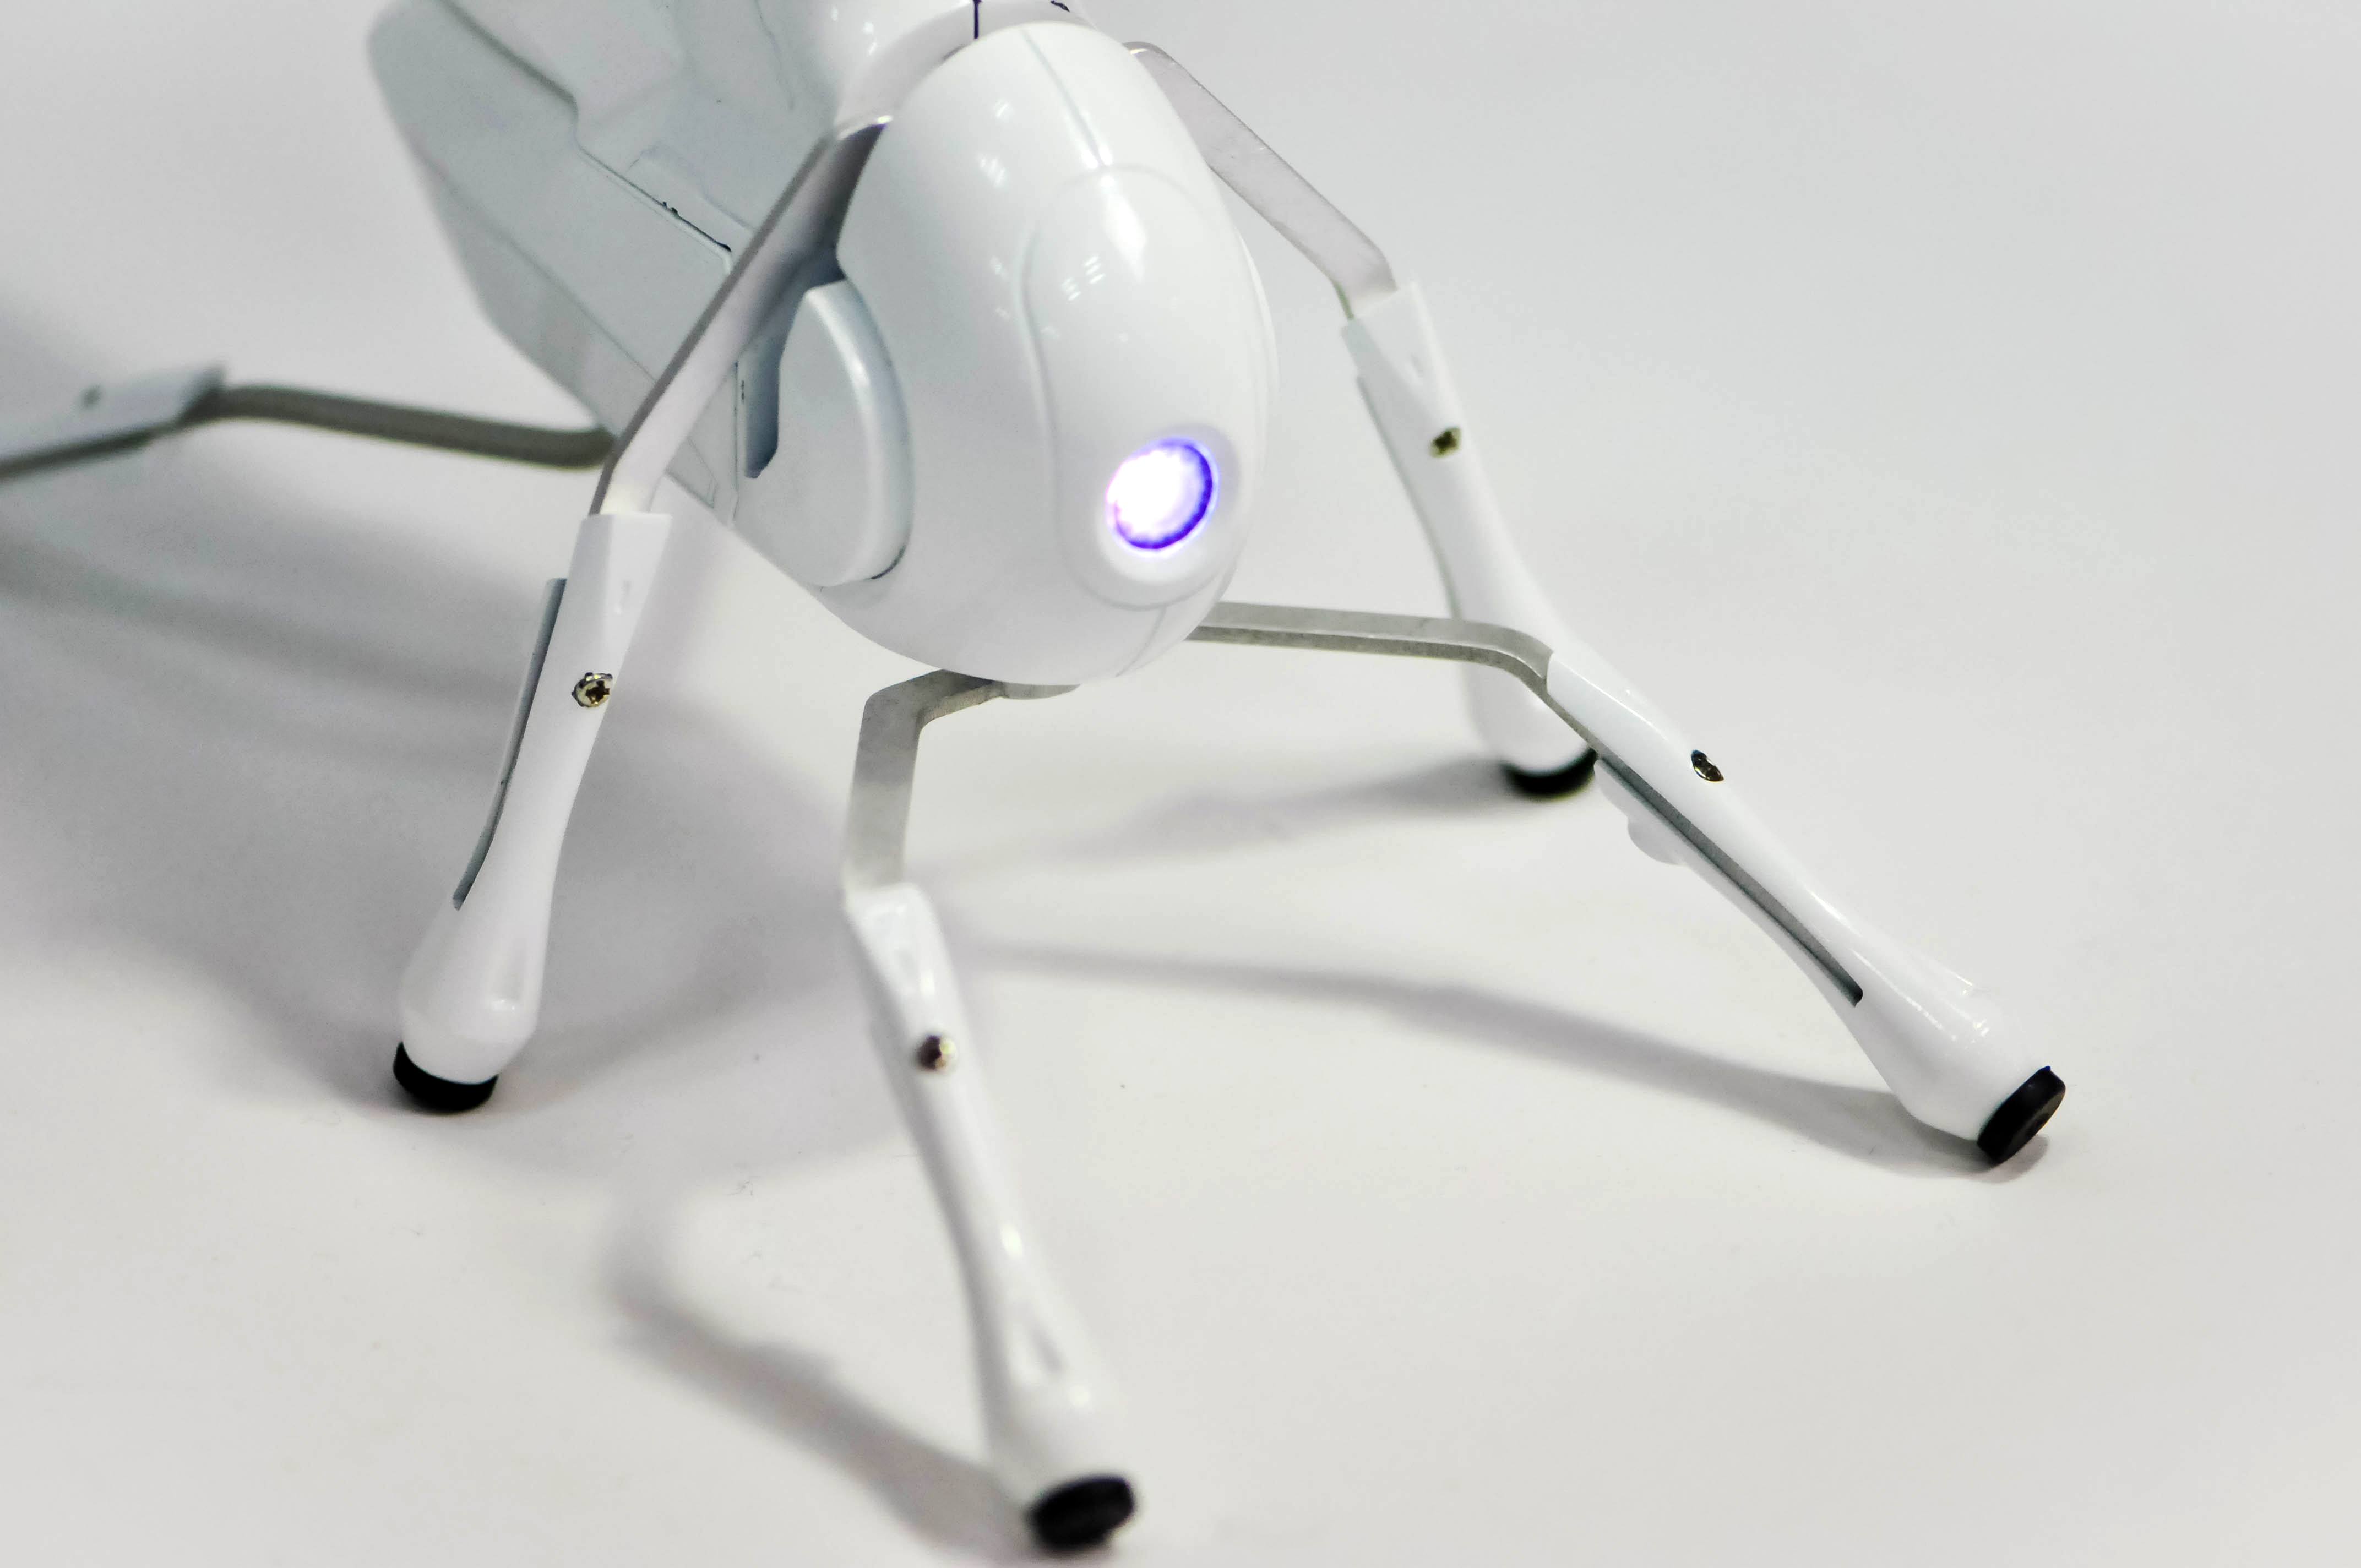 Antbo is a insect companion anyone can build – EEJournal